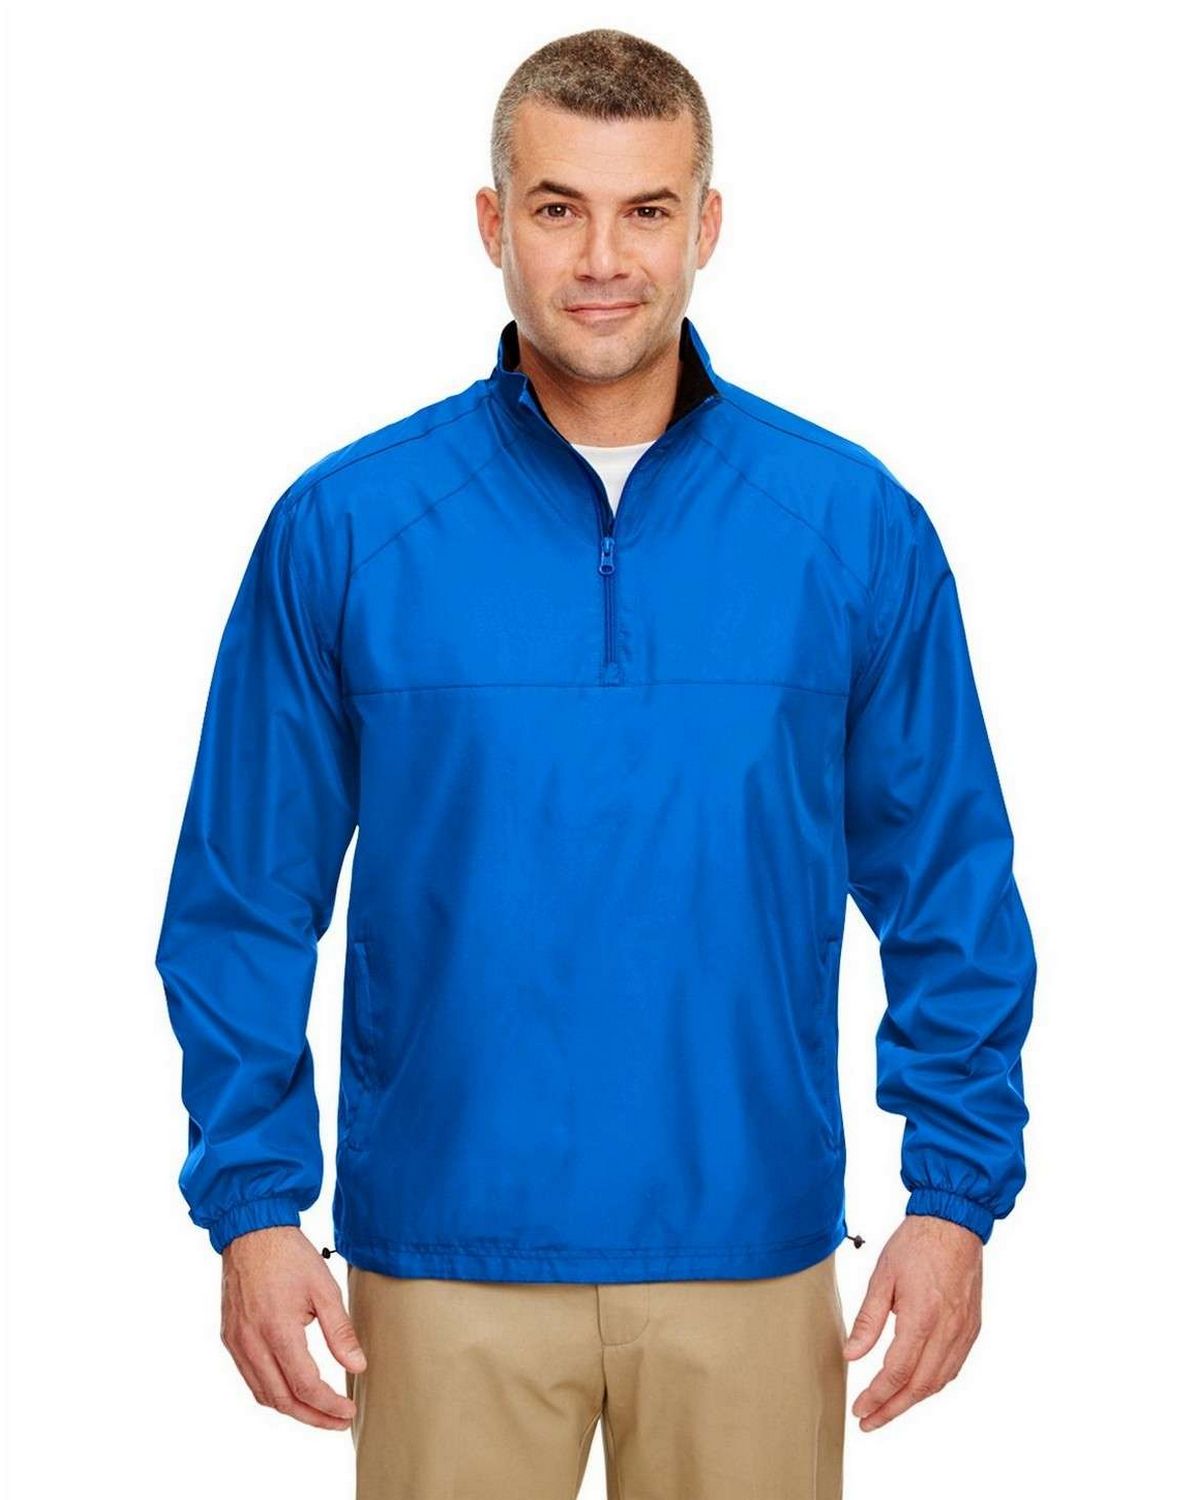 Ultraclub 8936 UC Poly 1/4 Zip Pullover - Shop at ApparelnBags.com